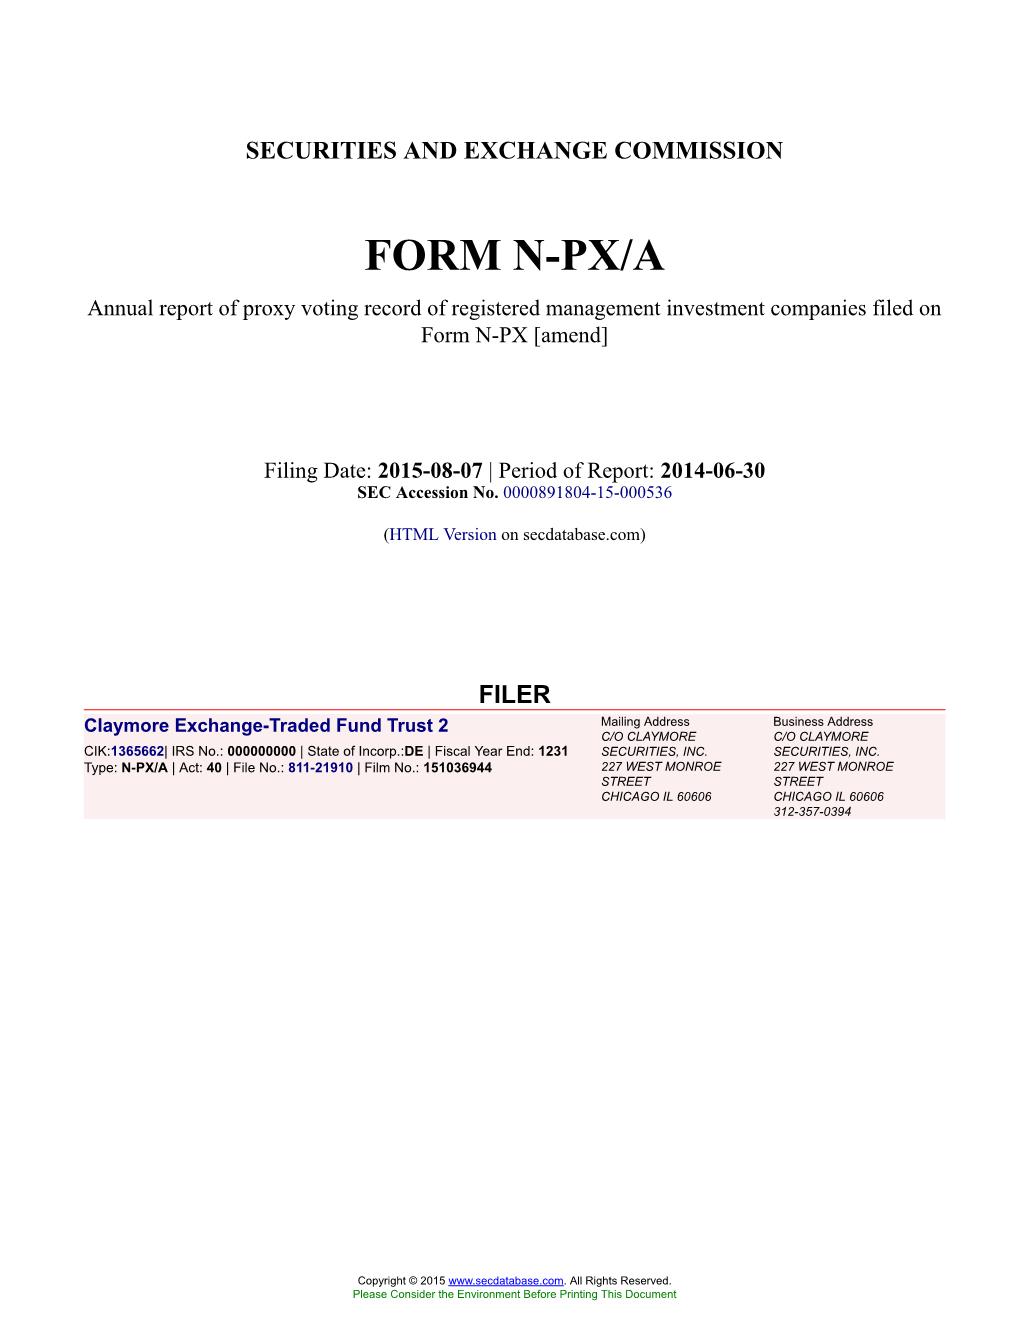 FORM N-PX/A Annual Report of Proxy Voting Record of Registered Management Investment Companies Filed on Form N-PX [Amend]